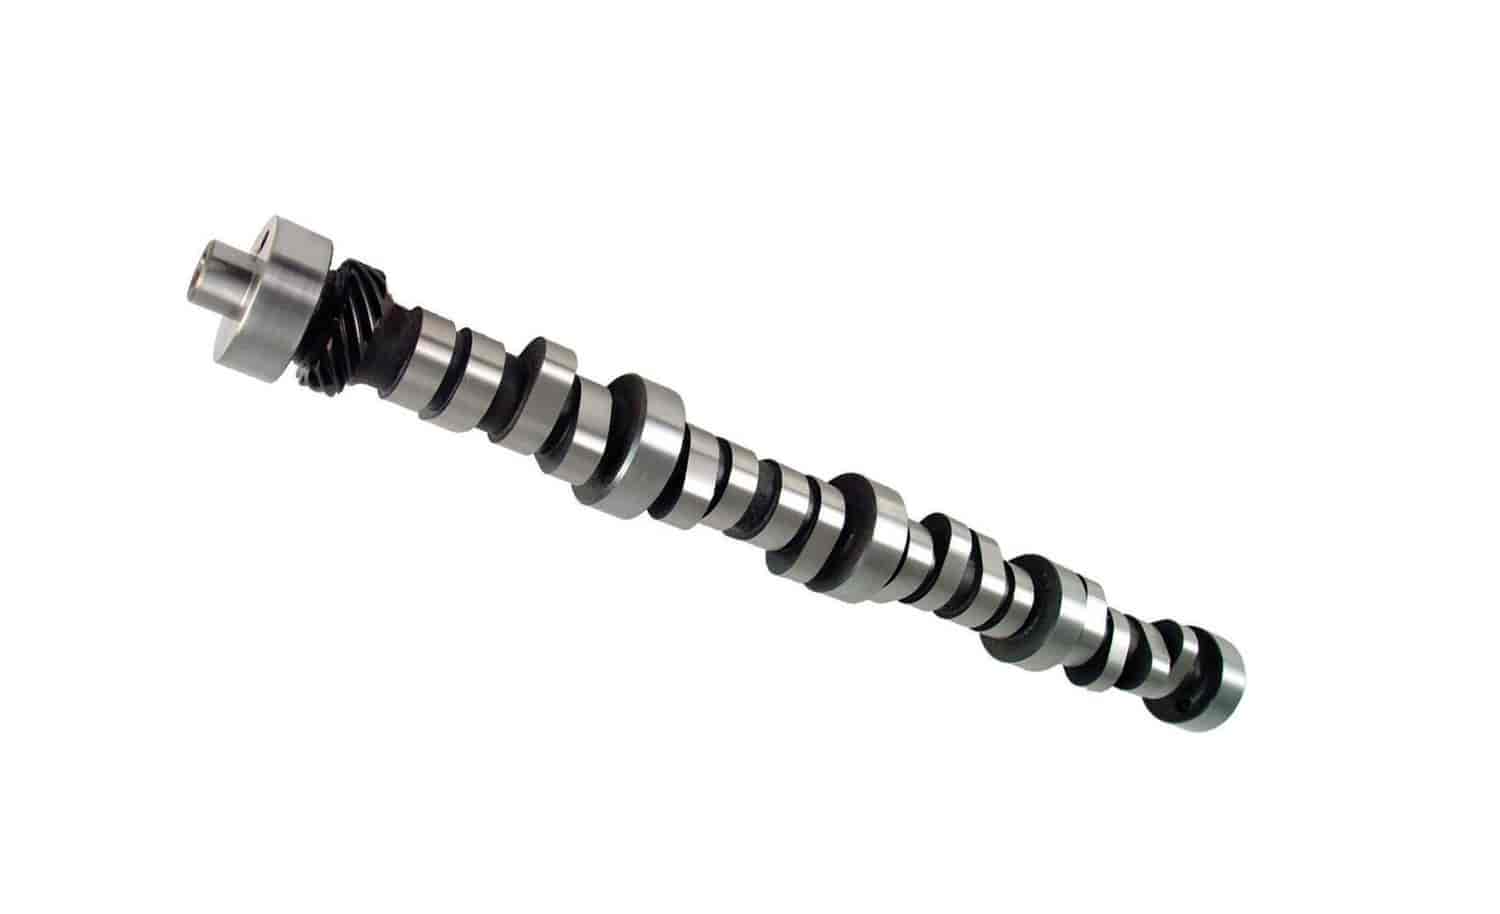 Comp Cams Xtreme Energy Hydraulic Roller Camshaft for Ford 5.0L [1500-5500 RPM]